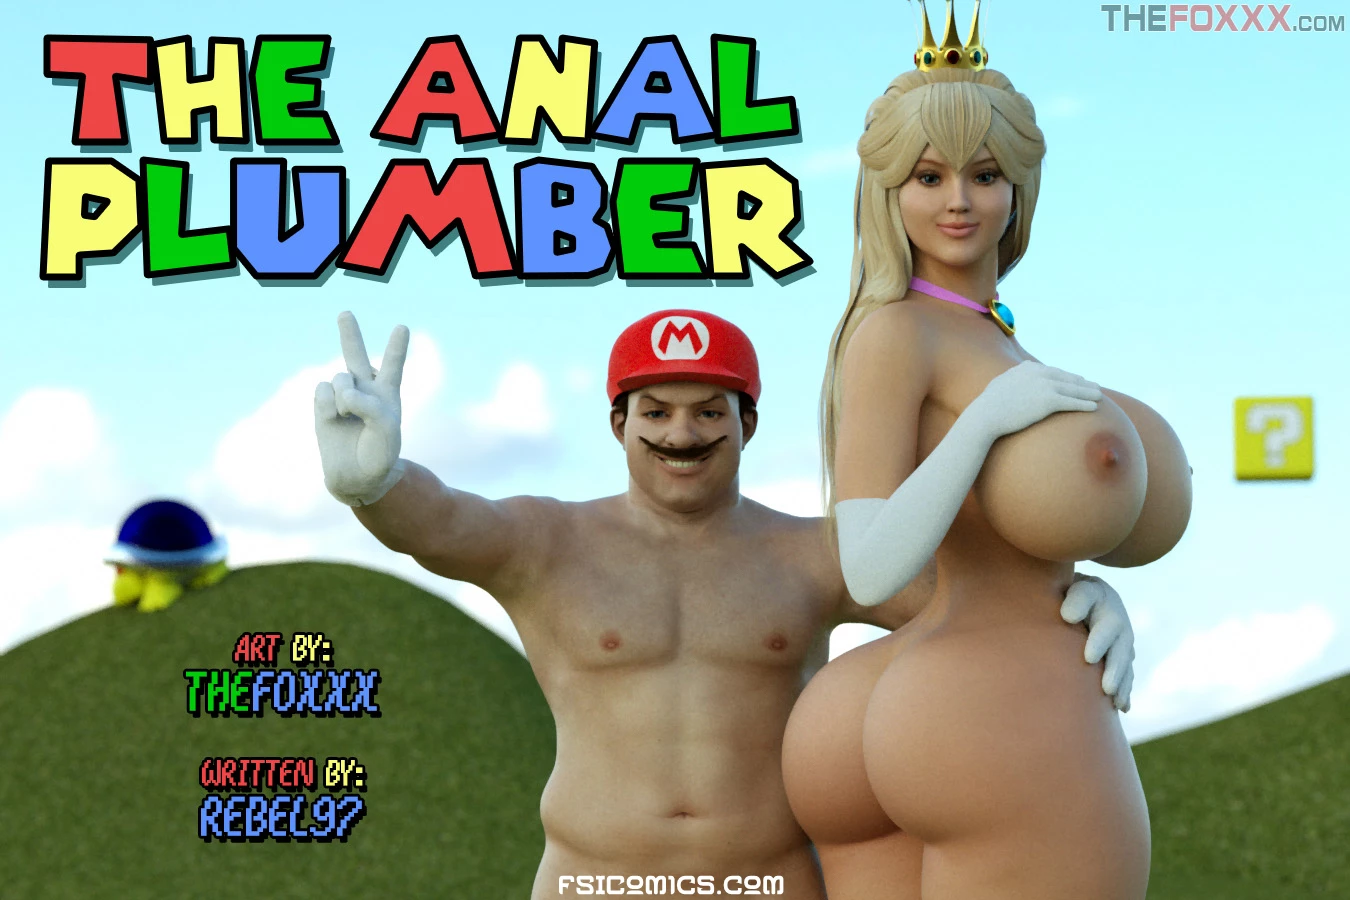 The Anal Plumber Chapter 1 – The FOXXX - 7 - FSIComics